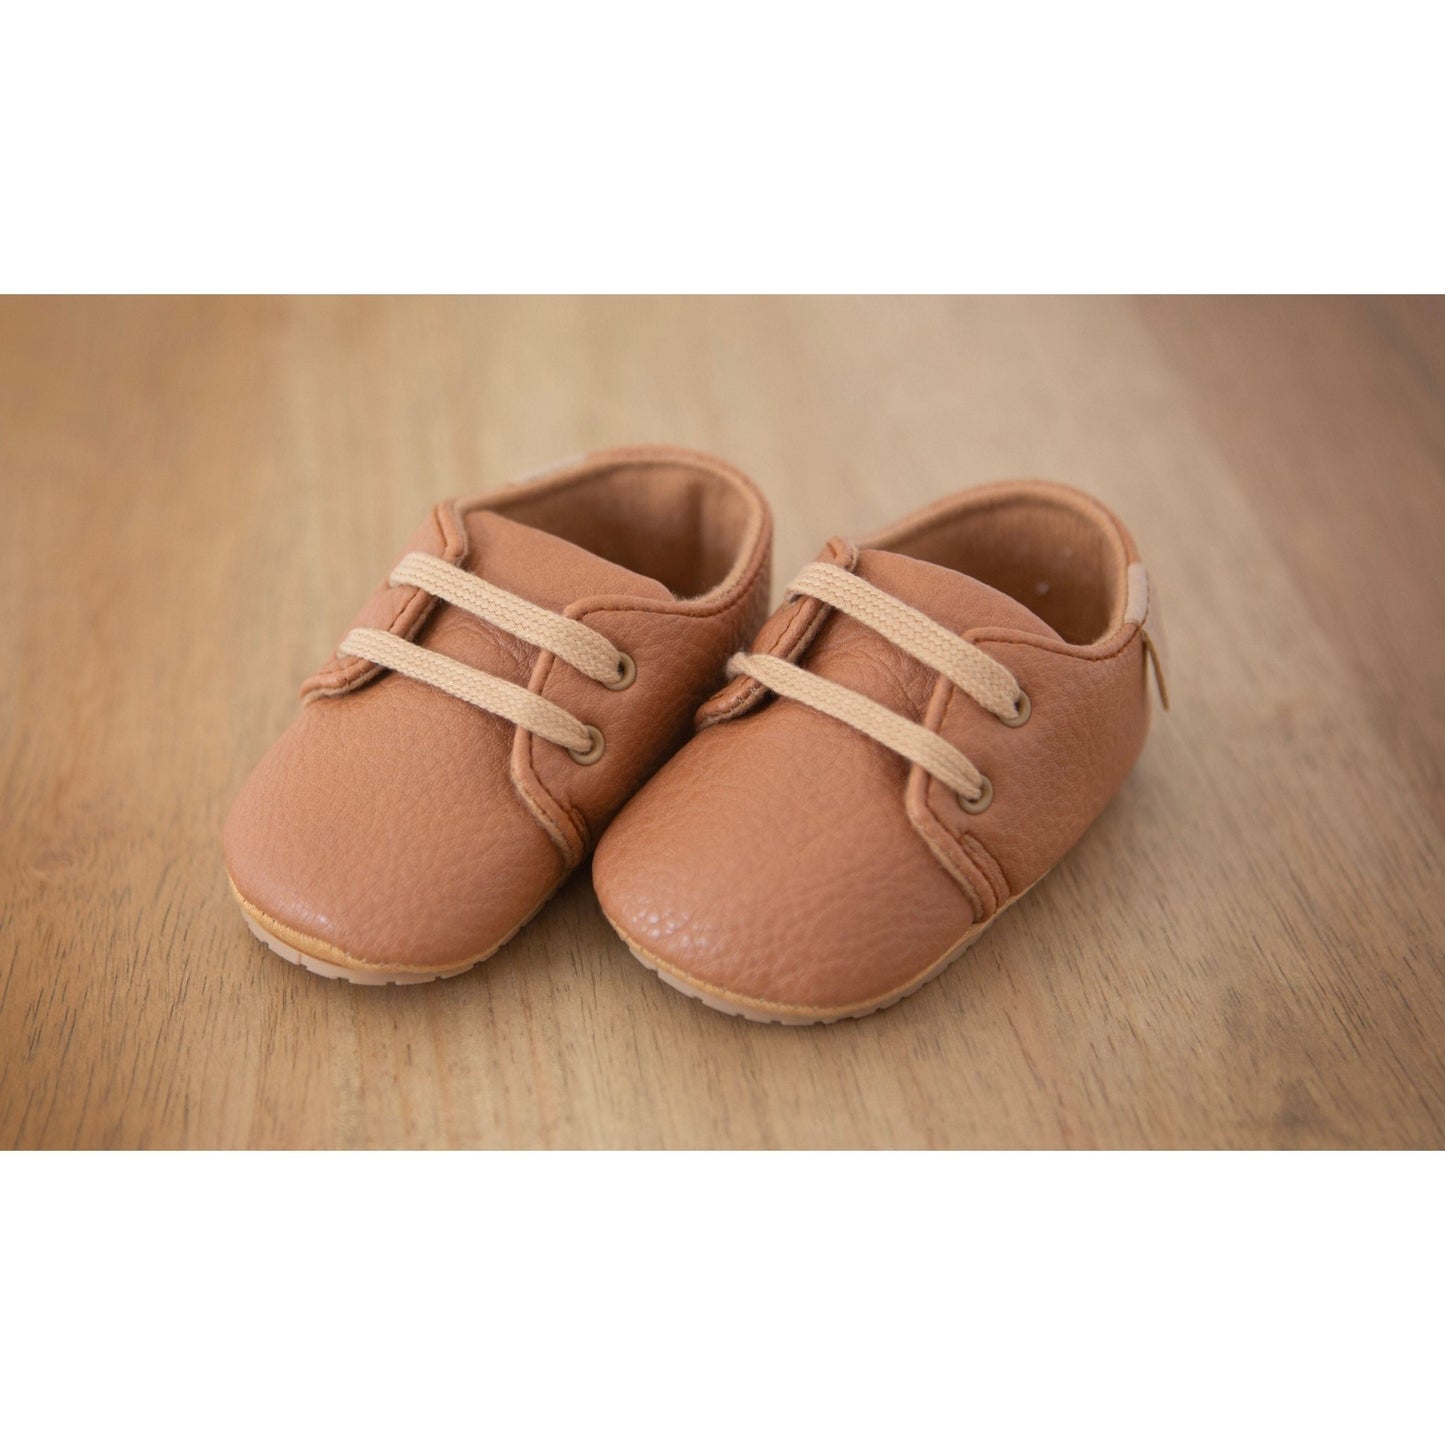 Baby Shoes Gender Neutral - Cheerful Lane